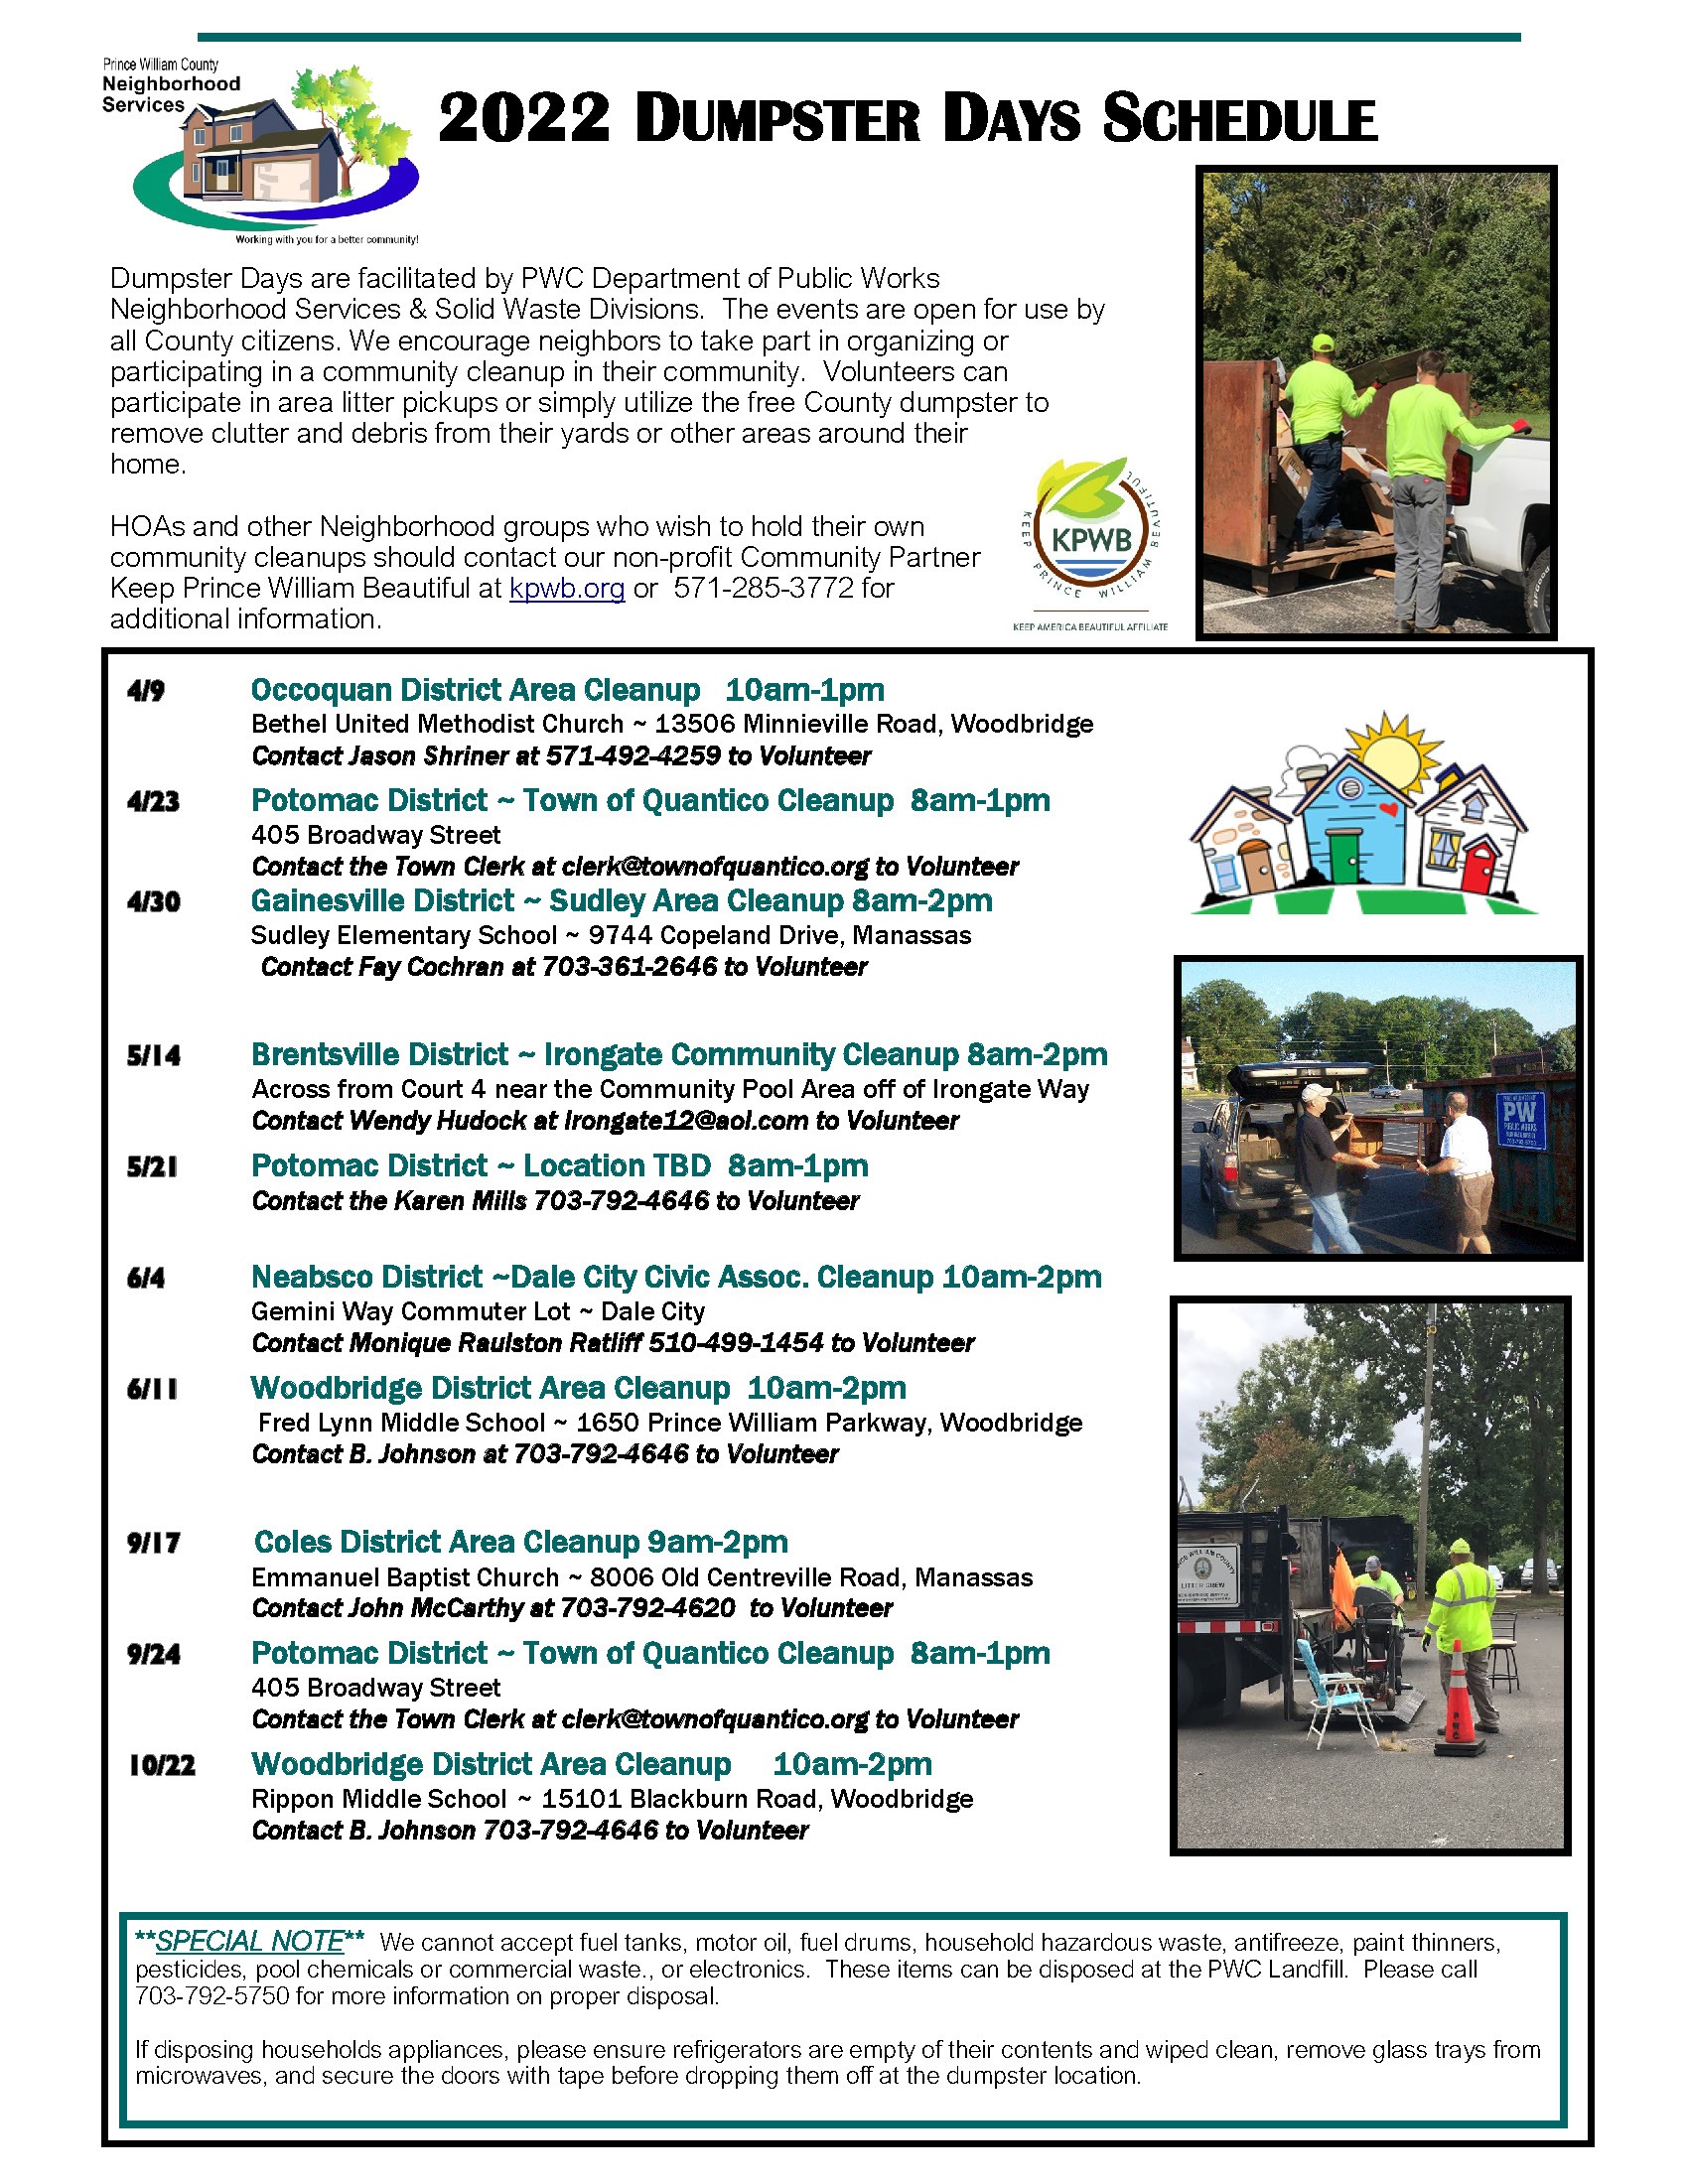 Dumpster Days Schedule 2022 FINAL - 2022 DUMPSTER DAYS: Brentsville District ~ Irongate Community Cleanup